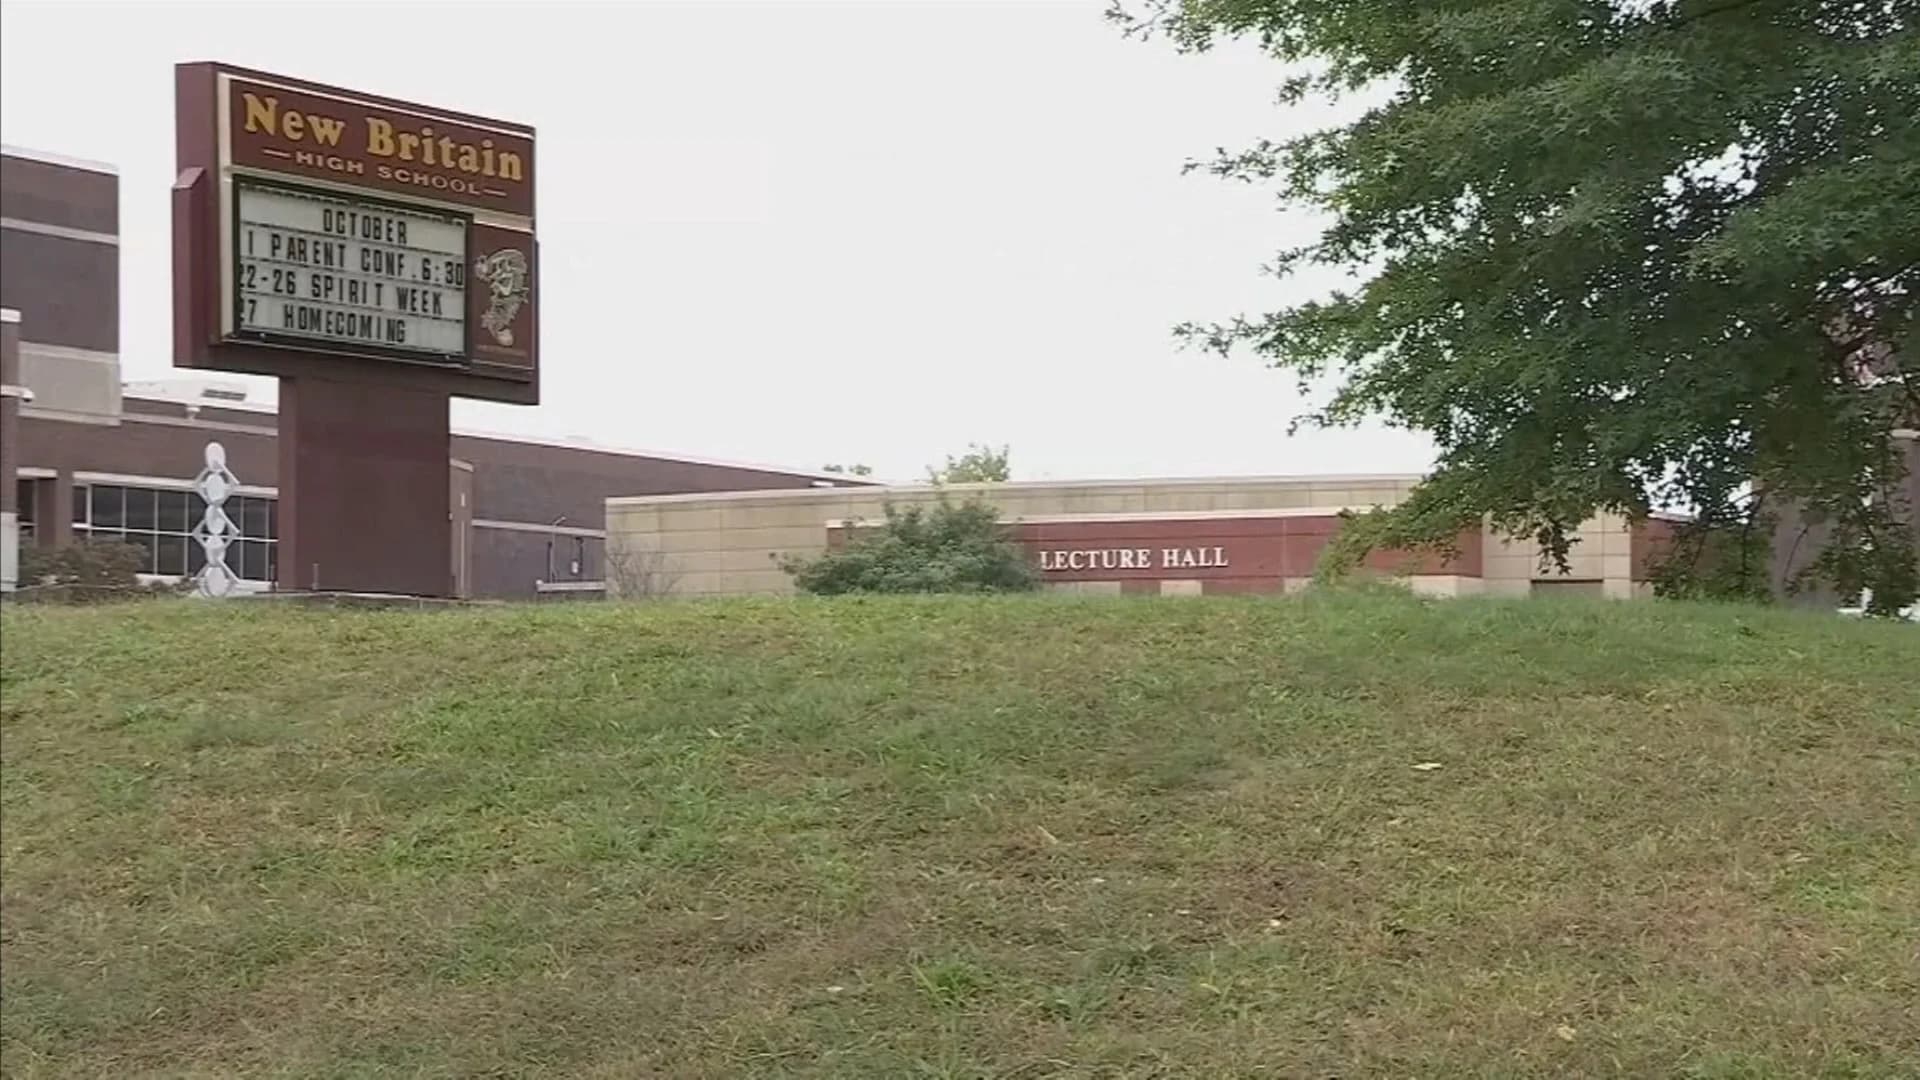 Police: CT teens face charges after filming sex acts in classroom